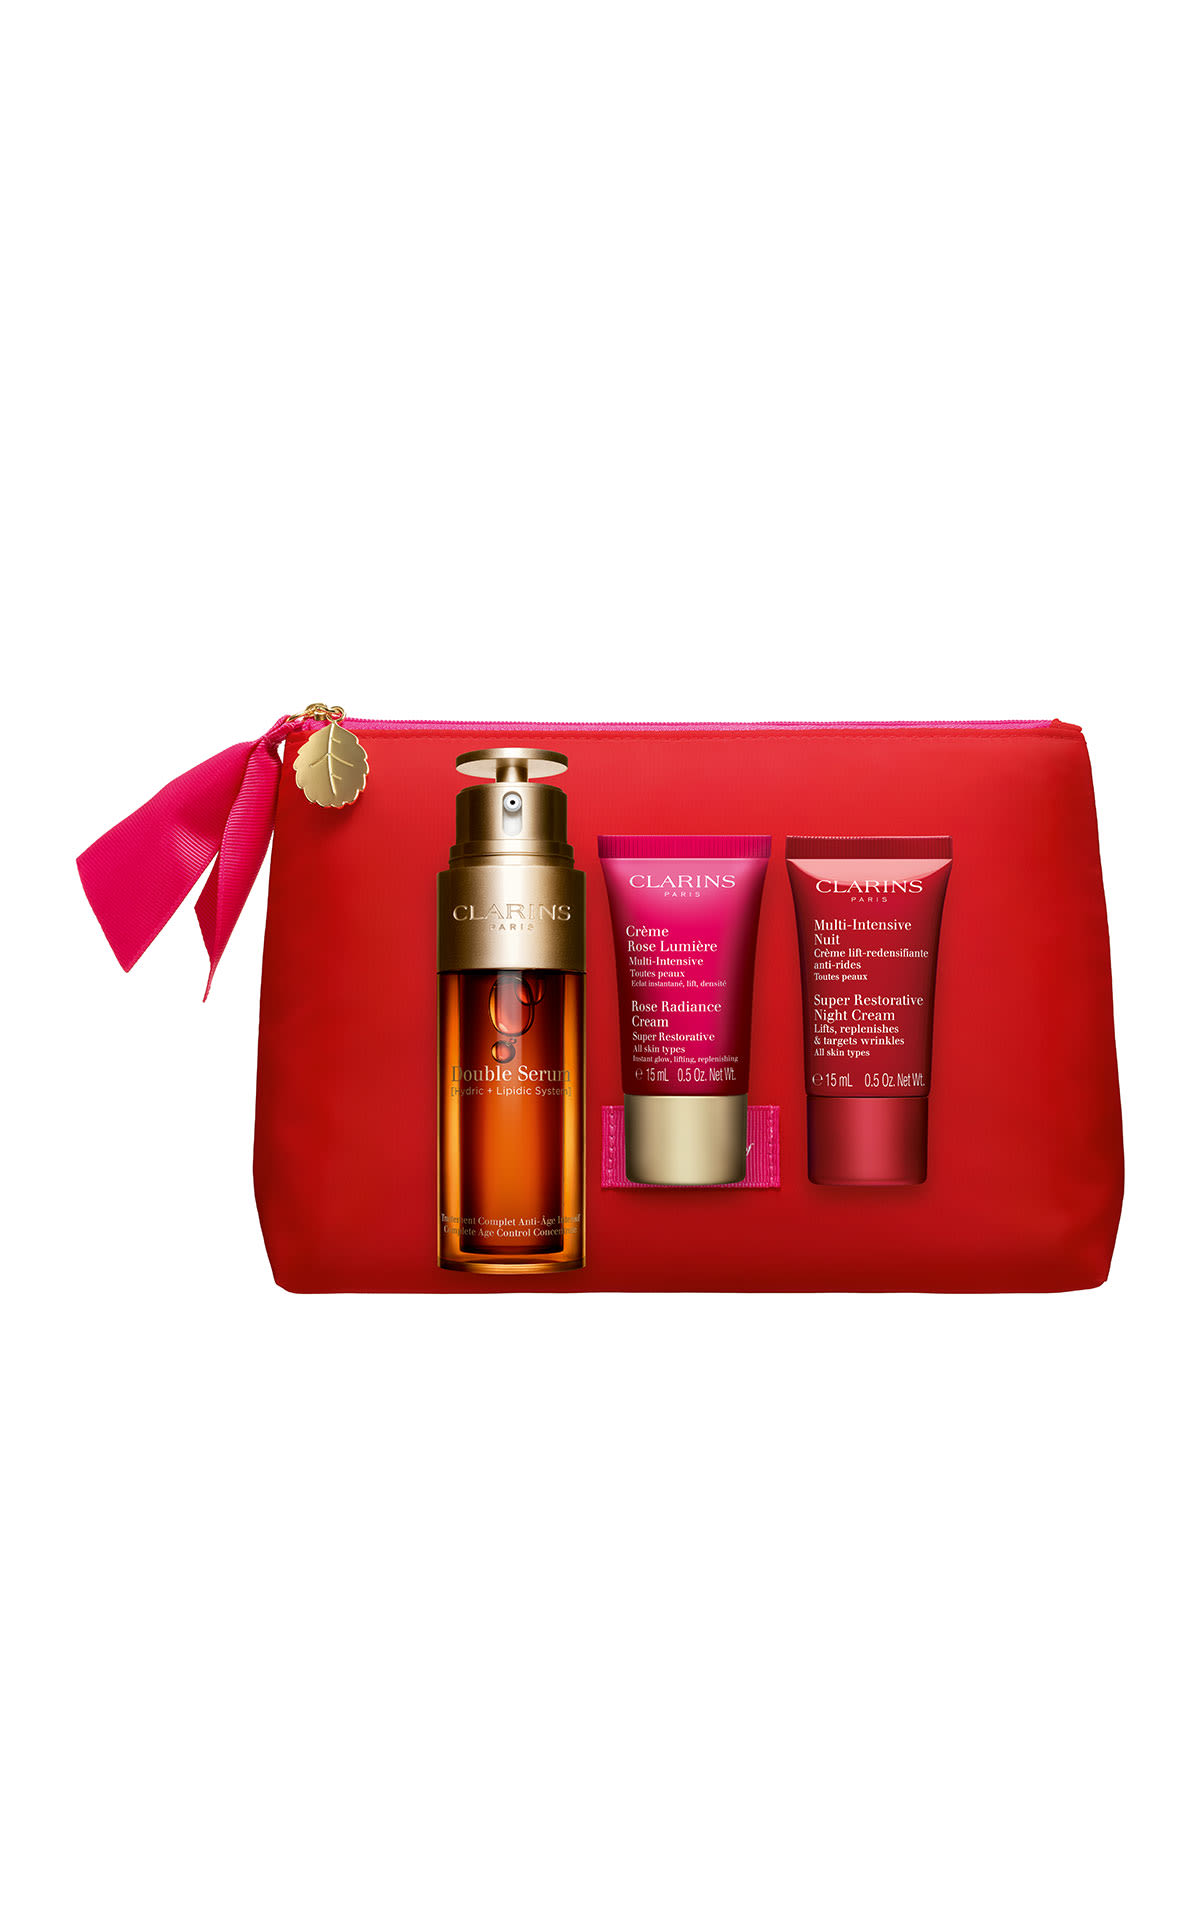 Clarins Double serum and super restorative collection from Bicester Village